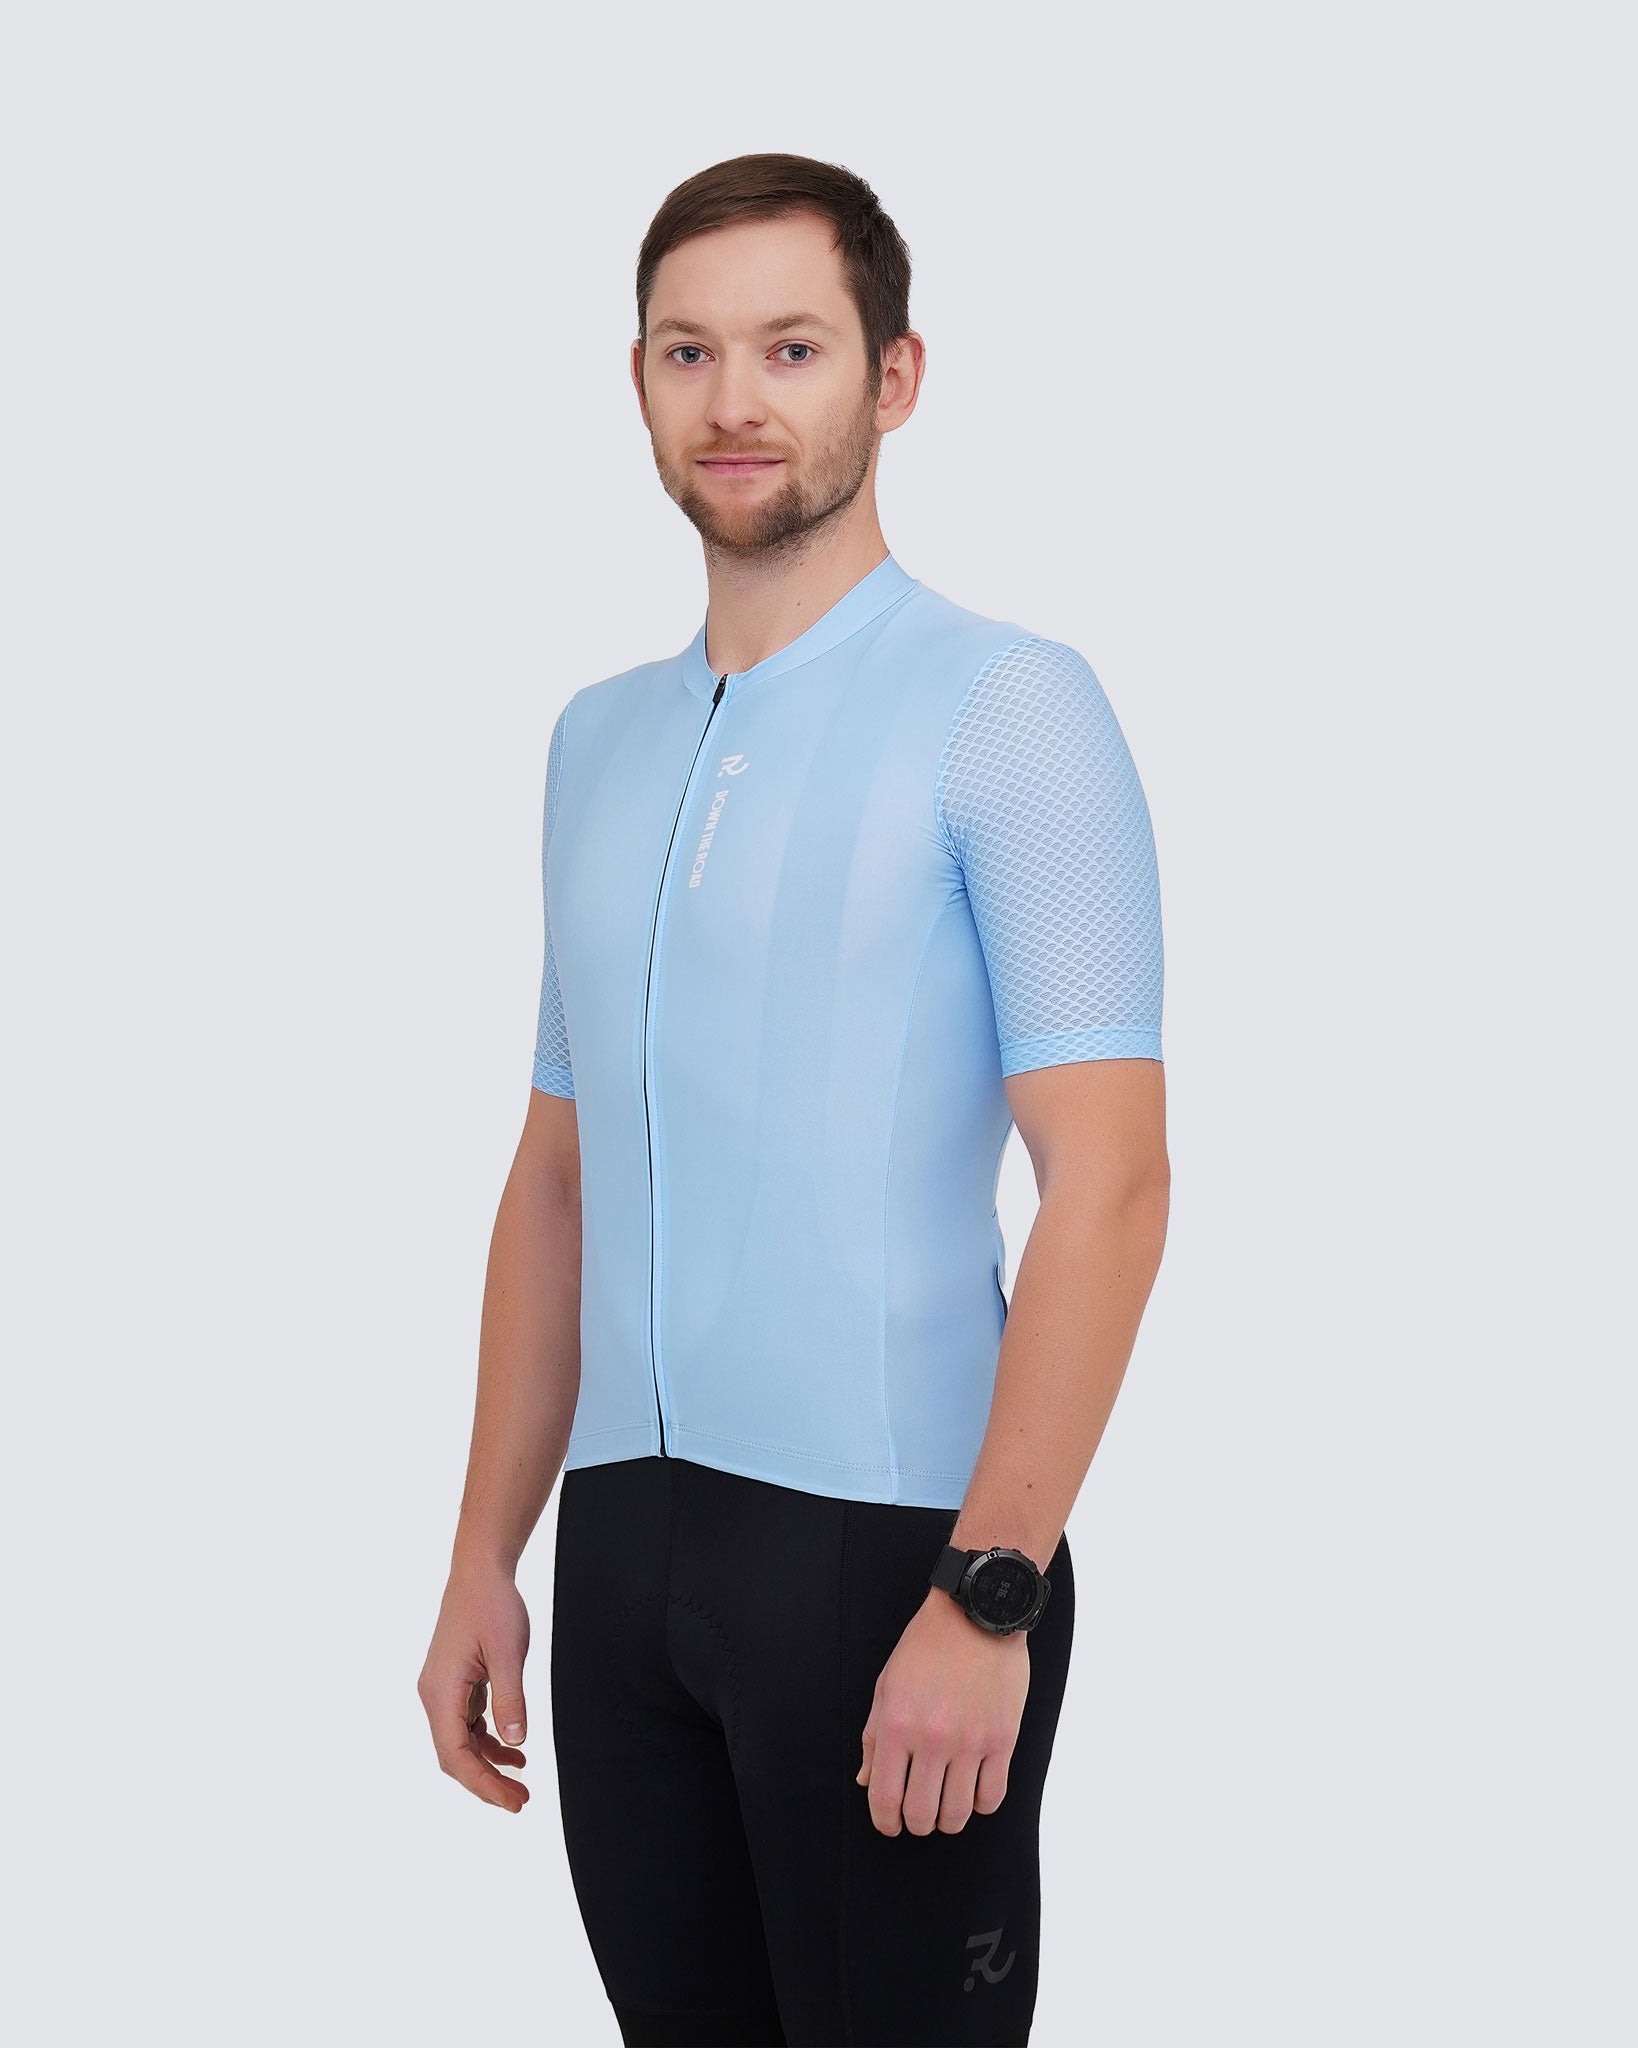 nature blue cycling jersey men side view